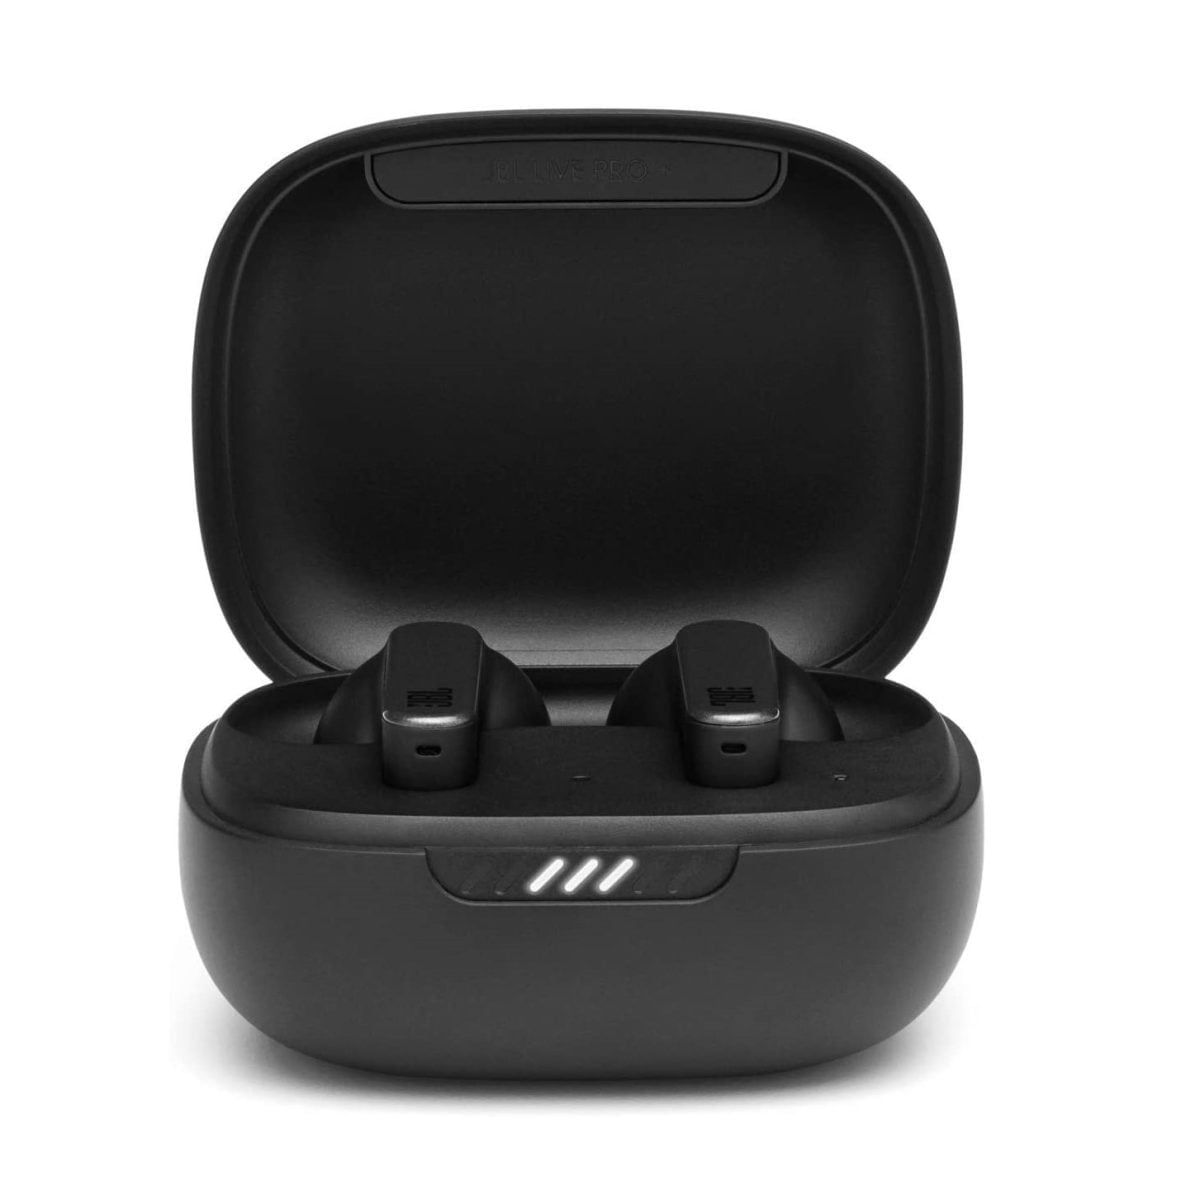 611Syan2Rjl. Ac Sl1500 Jbl &Lt;H1&Gt;Jbl Live Pro Plus True Wireless Noise Cancelling Earbuds-Black&Lt;/H1&Gt; Https://Www.youtube.com/Watch?V=Oan6Moxjv58 &Nbsp; The Best Audio Solution Not Matter The Device, Jbl Live Pro+ Tws Delivers An Immersive True Wireless Experience With Incredible Jbl Signature Sound. Let Smart Ambient Connect You To Your Environment, Or Focus On The Music With Adaptive Noise Cancelling. Then Switch Easily From Tunes To Group Calls With 4 Mics (2 Beamforming Mics Per Side) To Capture Your Voice With The Feeling Of Face-To-Face Conversation And A Third Mic For Environmental Noise Reduction. All Commands Are On The Earbuds, So You Can Manage Music And Calls With Your Finger Only. Jbl Earbuds Jbl Live Pro Plus Noise Cancelling Earbuds-Black